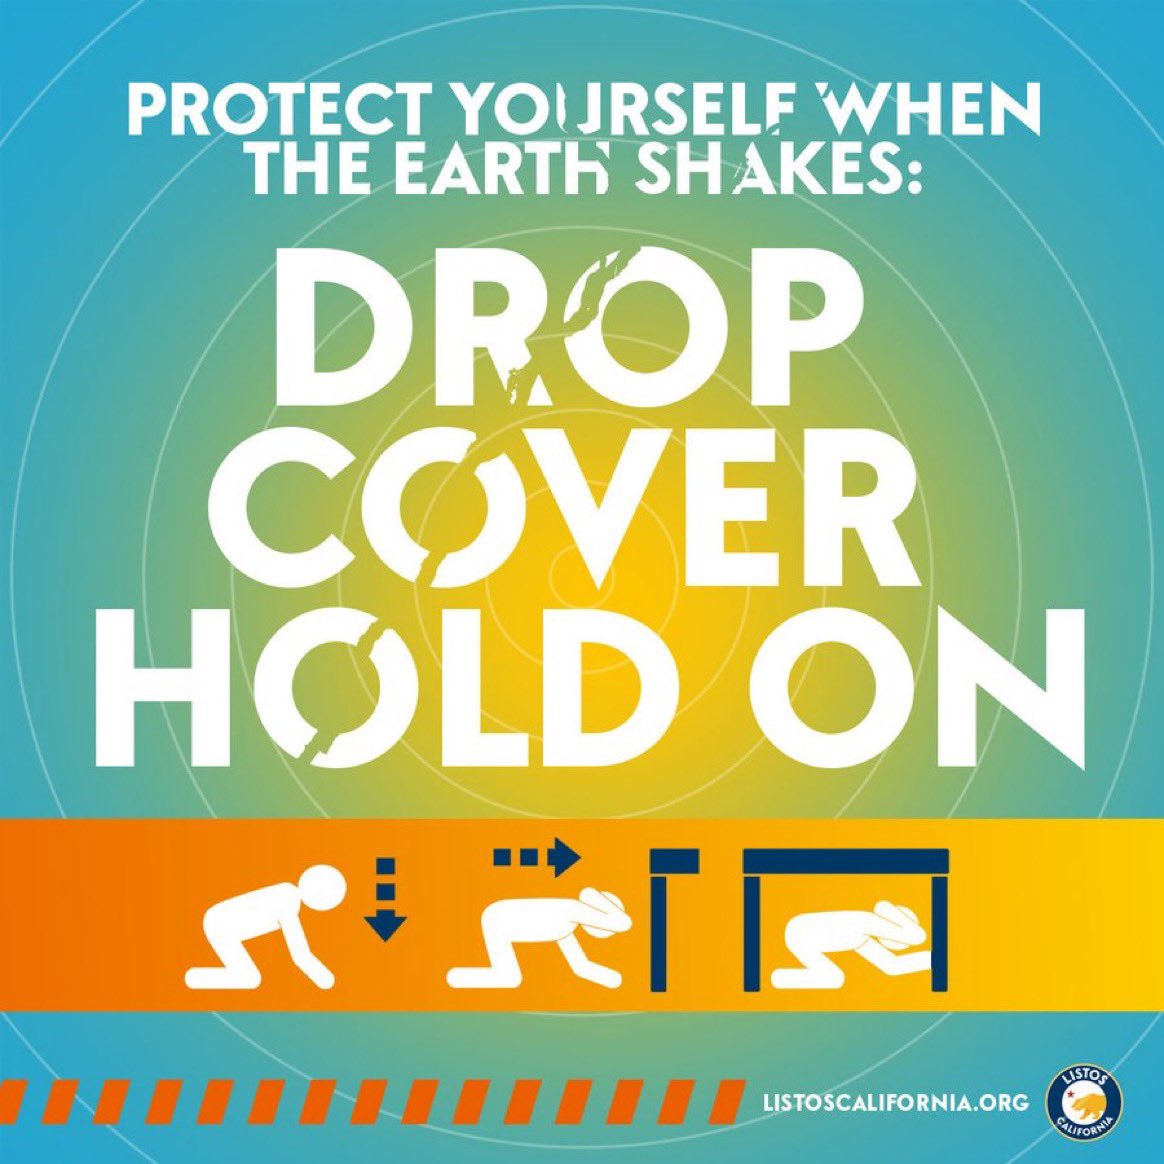 Earthquakes can happen at any time in California. That’s why it’s important to know what to do before, during and after the ground shakes. Visit earthquake.ca.gov for earthquake-specific tips. Go to listoscalifornia.org for general disaster preparedness advice.